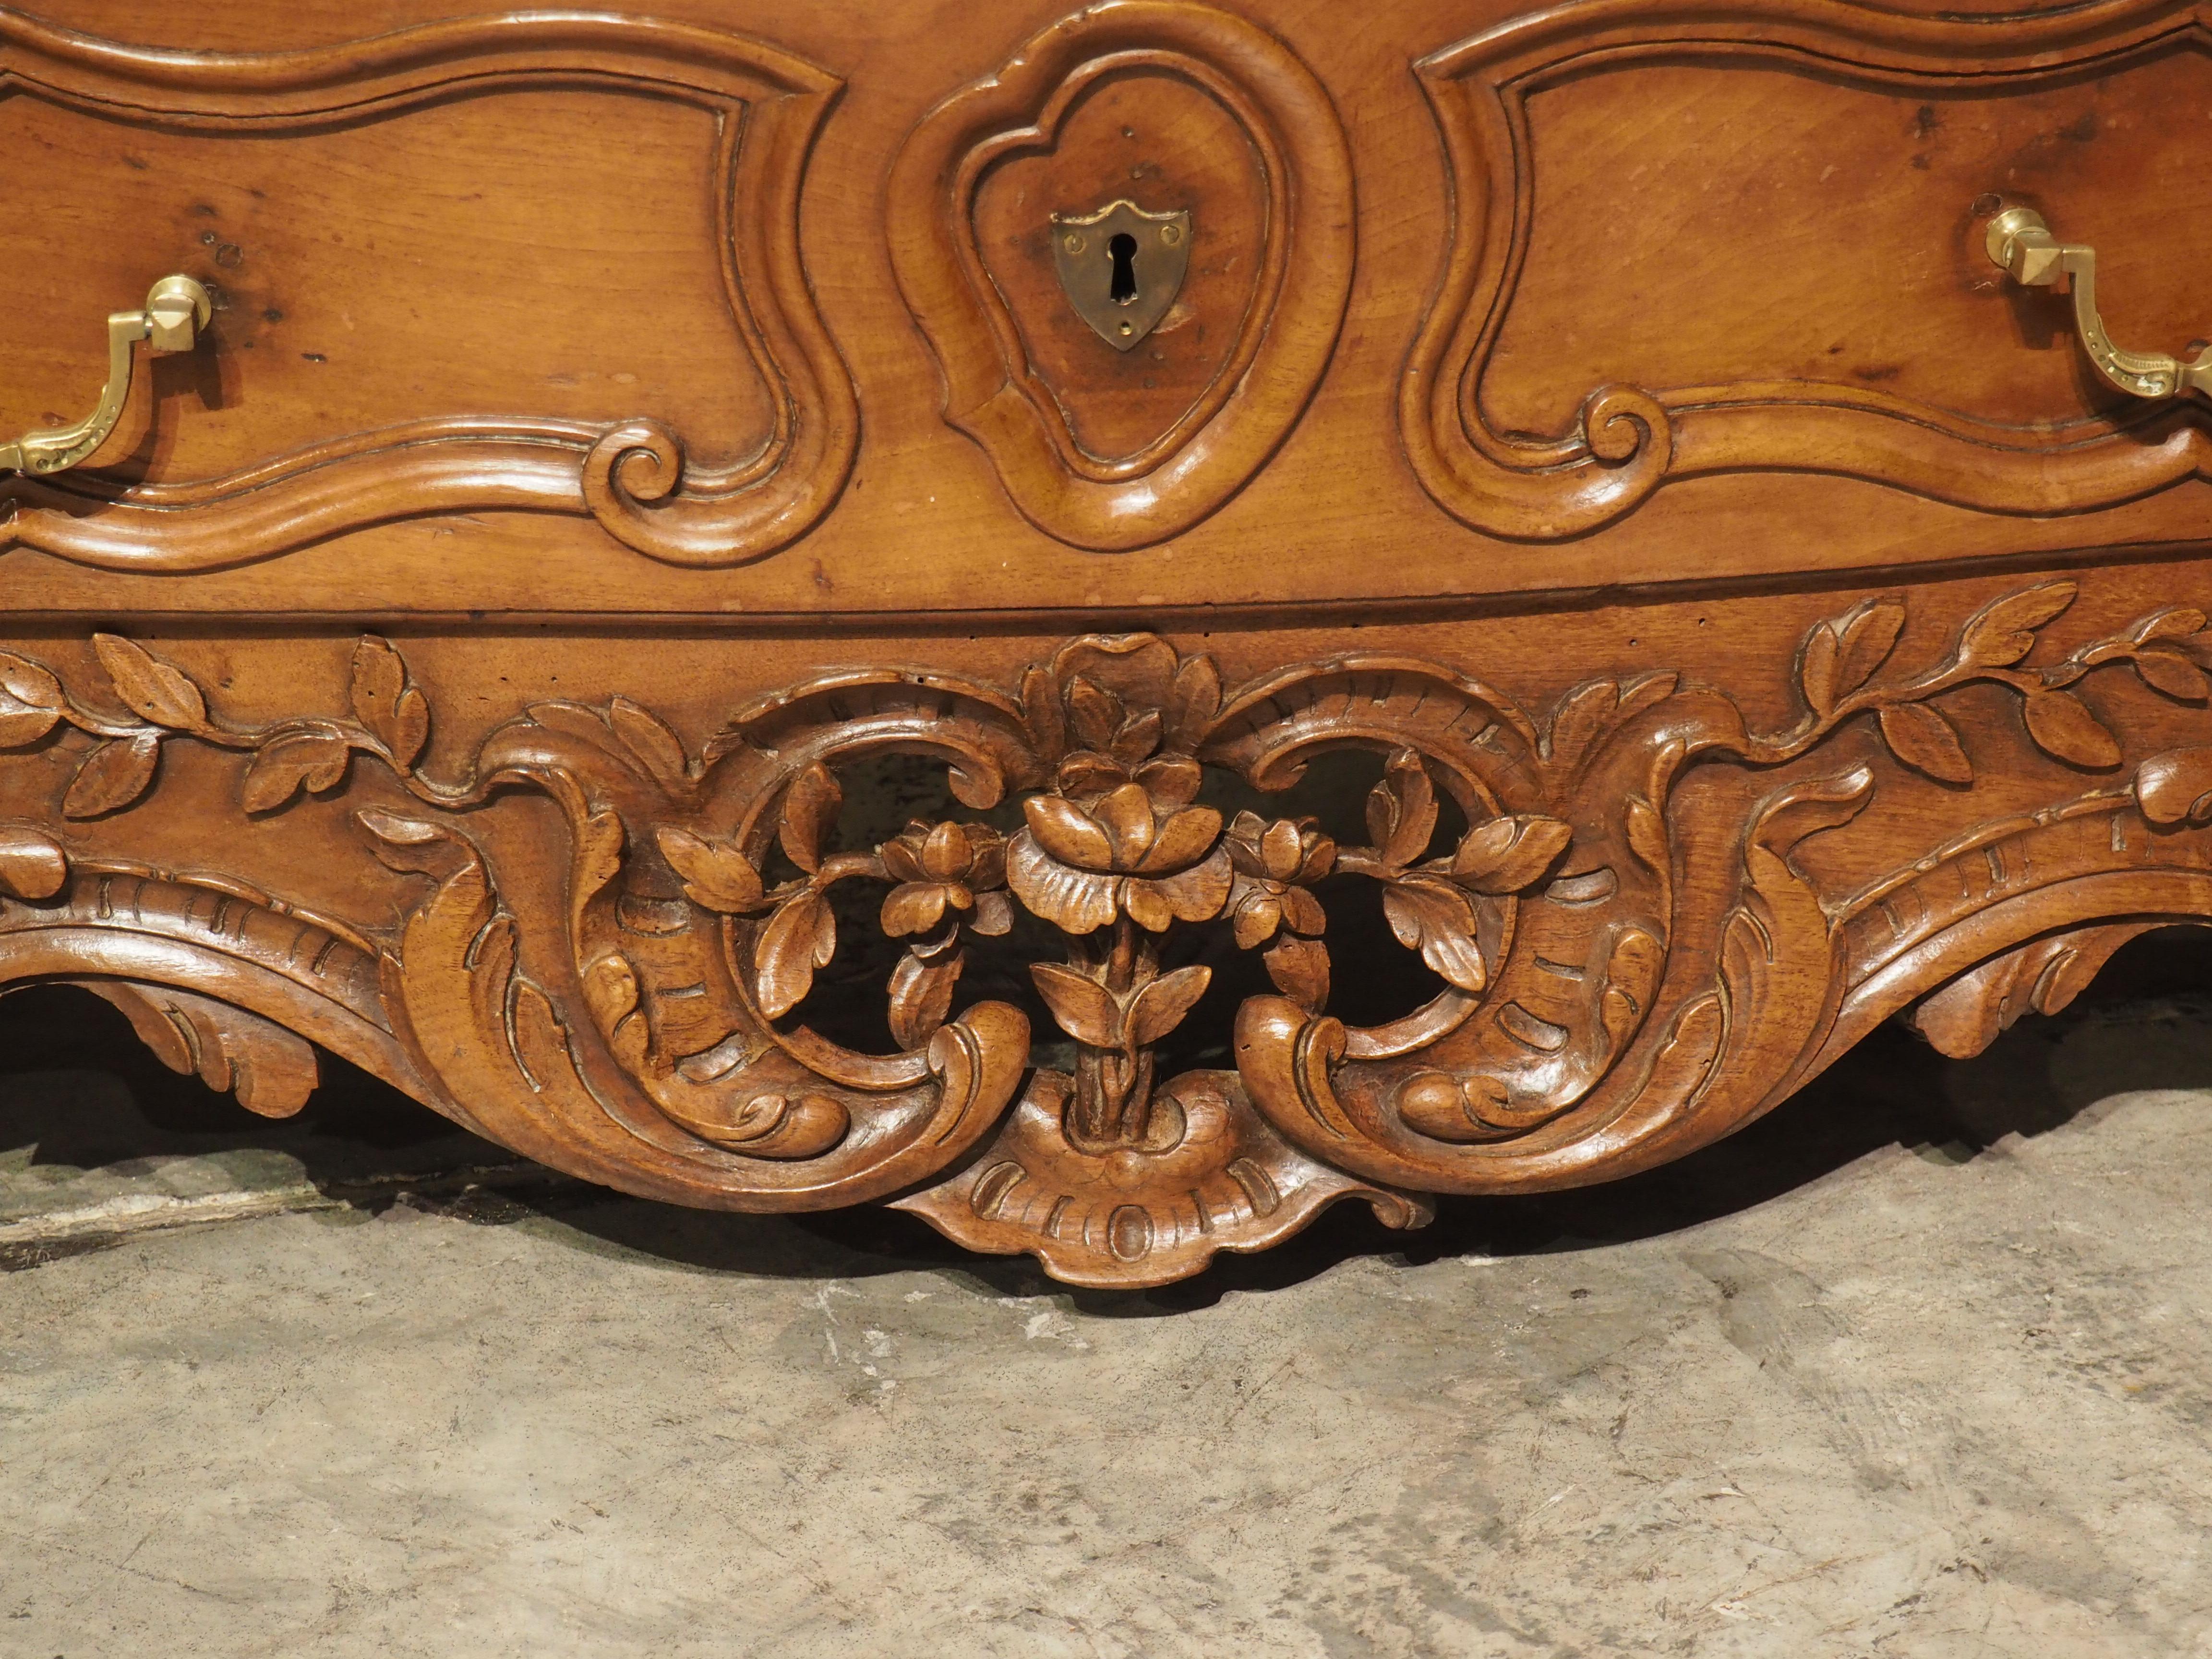 An en tombeau is a type of commode with three tiers of drawers and short legs. Our walnut wood chest of drawers was hand-carved in Provence, France during the 1700’s and features floral and foliate décor and four pronounced hoof feet.

The shaped